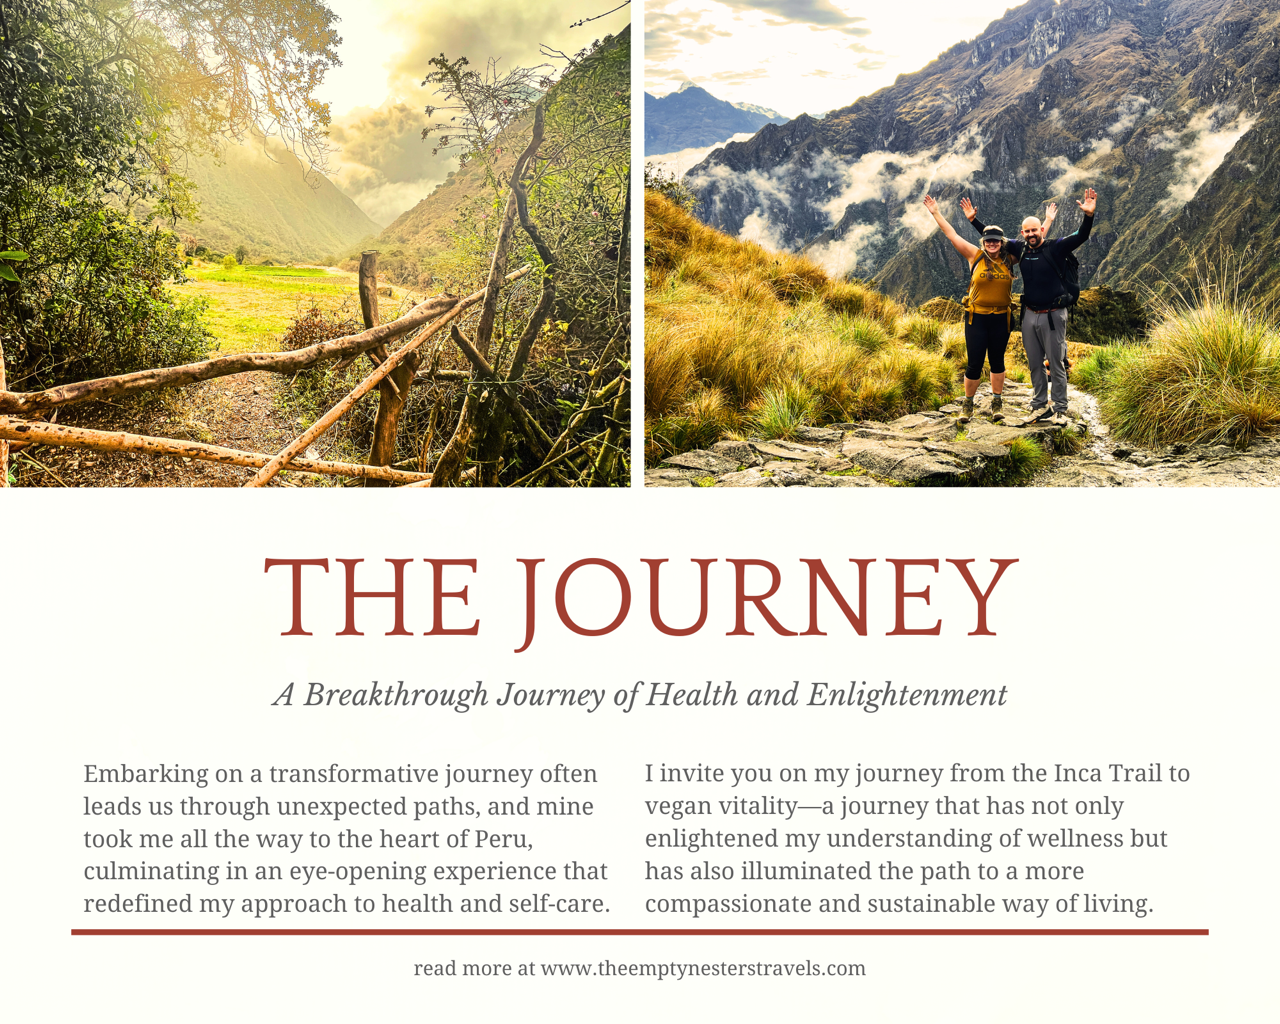 From the 4-day Inca Trail to Vegan Vitality: A Breakthrough Journey of Health and Enlightenment